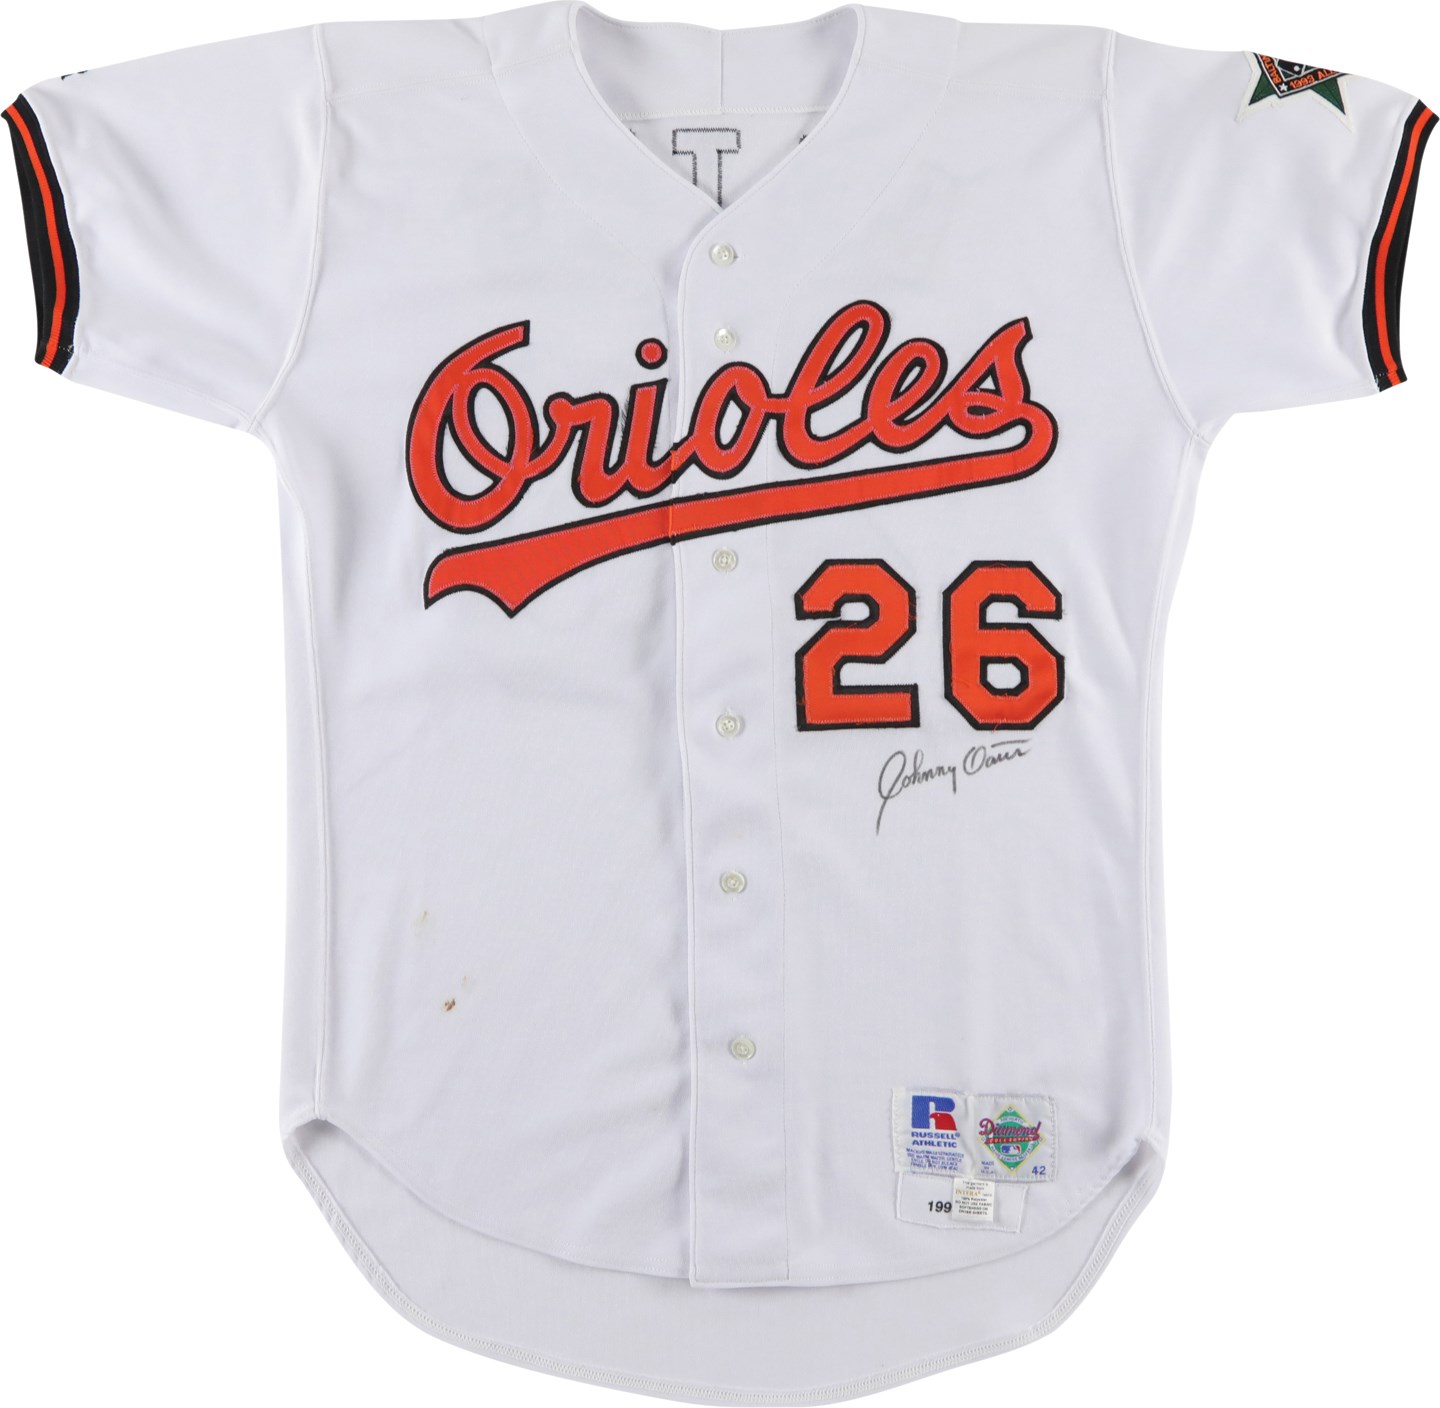 Baseball Equipment - 1993 Johnny Oates Baltimore Orioles Signed Game Worn Managers Jersey